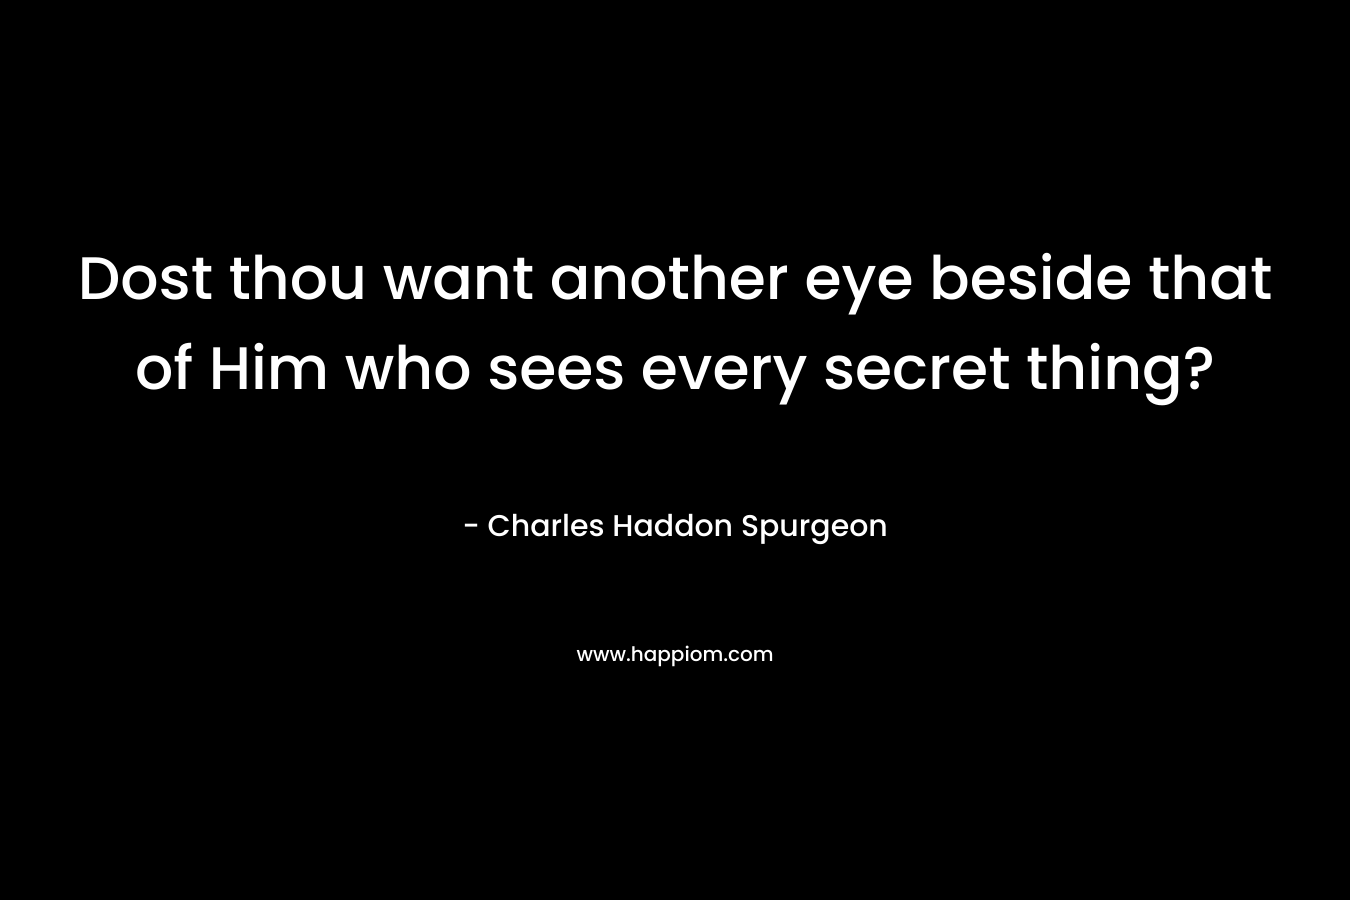 Dost thou want another eye beside that of Him who sees every secret thing?